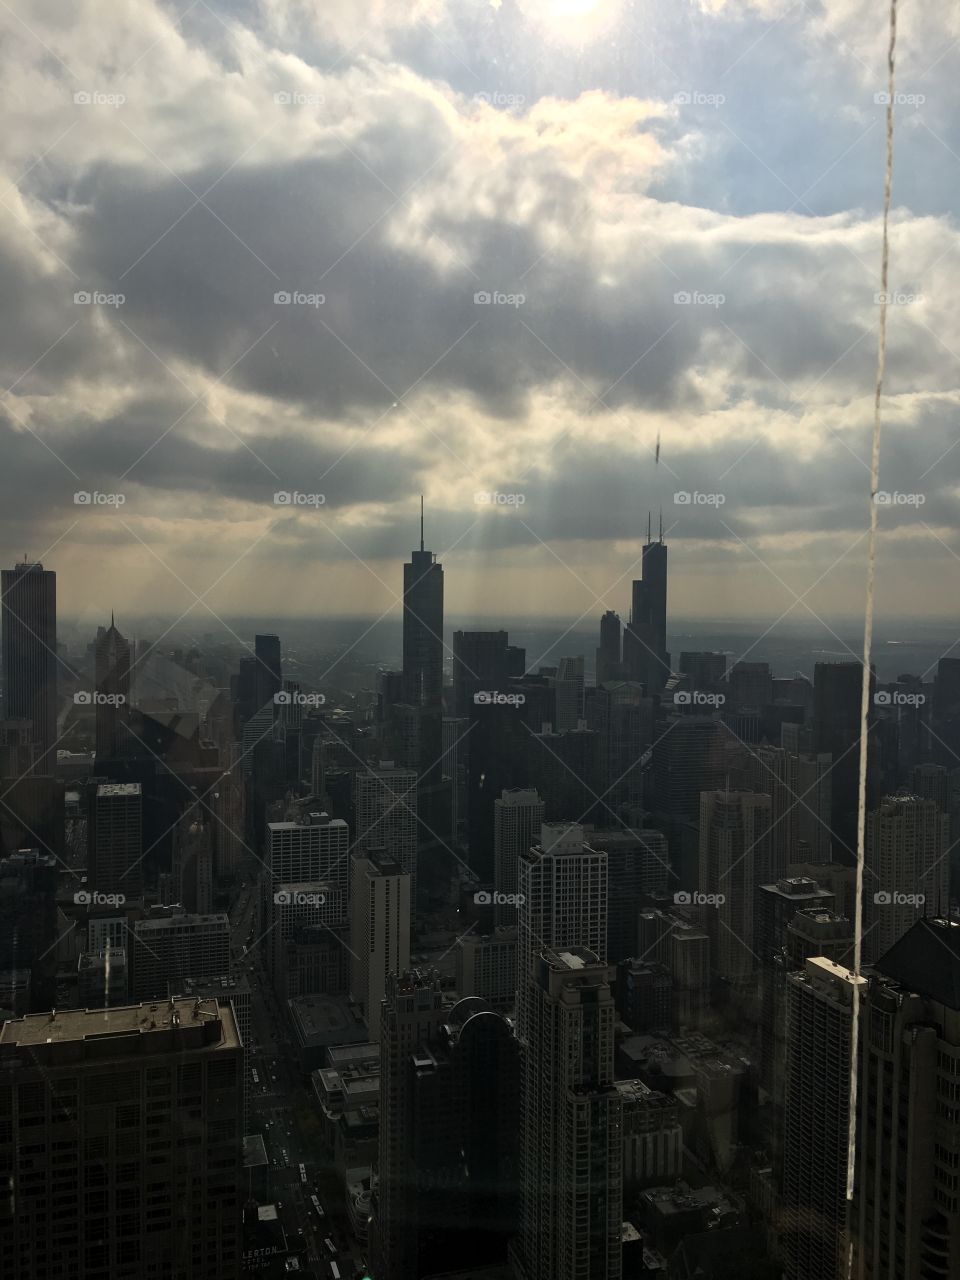 View of popular chicago skyline buildings and architecture 